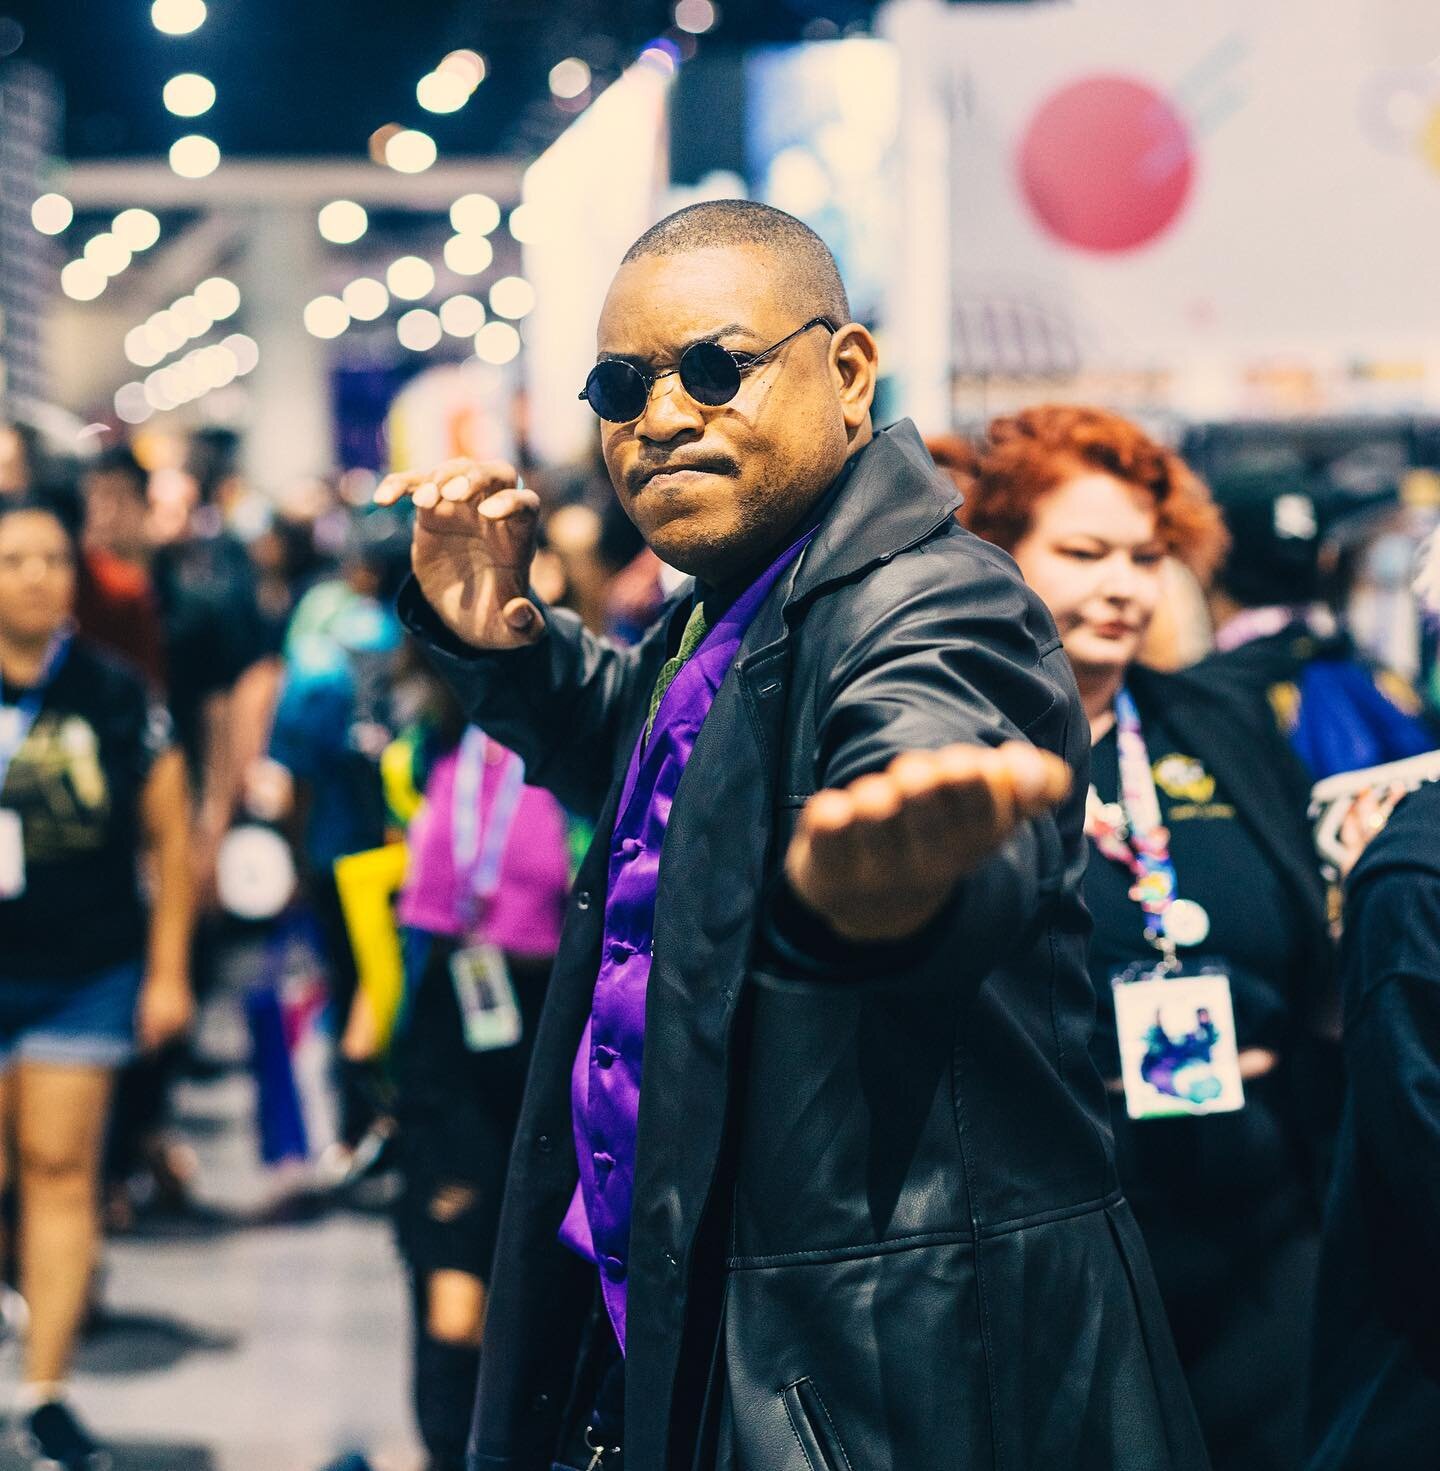 Red pill or blue pill
Comment below
&bull;
&bull;
&bull;
&bull;
&bull;
#comiccon #sdcc #comiccon2023 #sdcc2023 #comics #cosplay #cosplayer #sandiegocomiccon #comicbooks #thematrix #comic #redpill #matrixcosplay #morpheus #morpheuscosplay #comicbook #